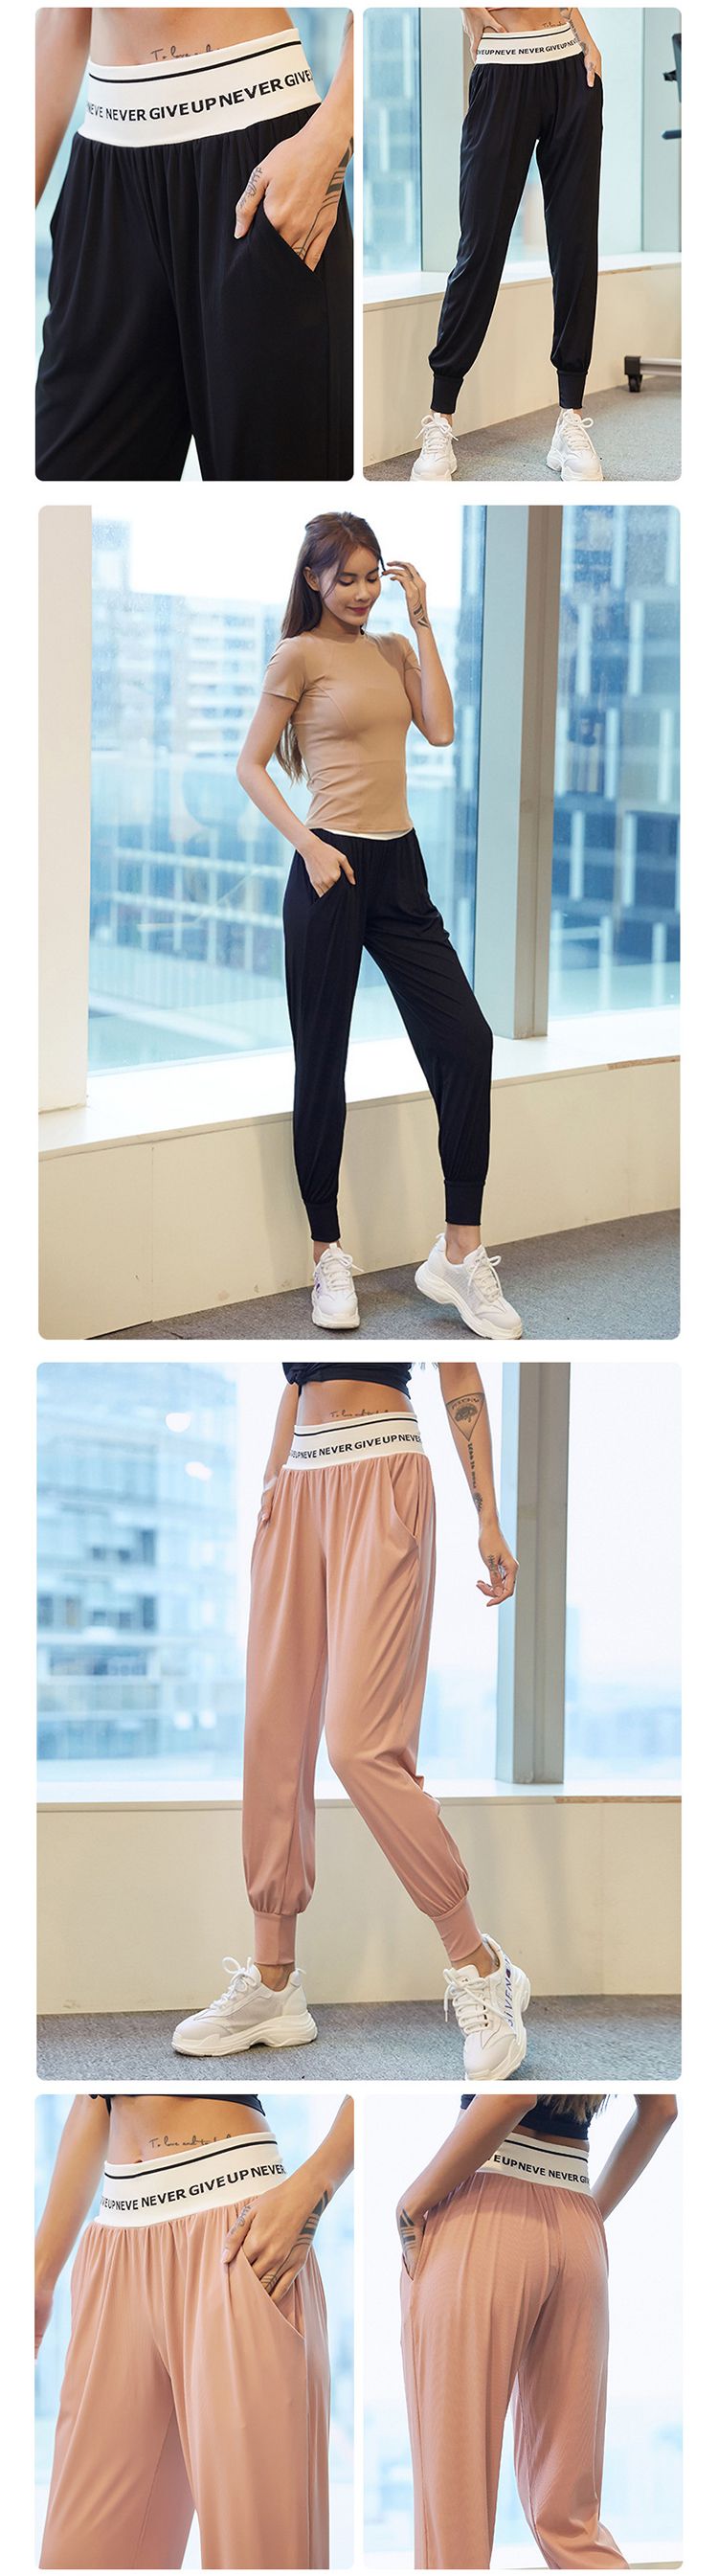 Casual Sports Pants